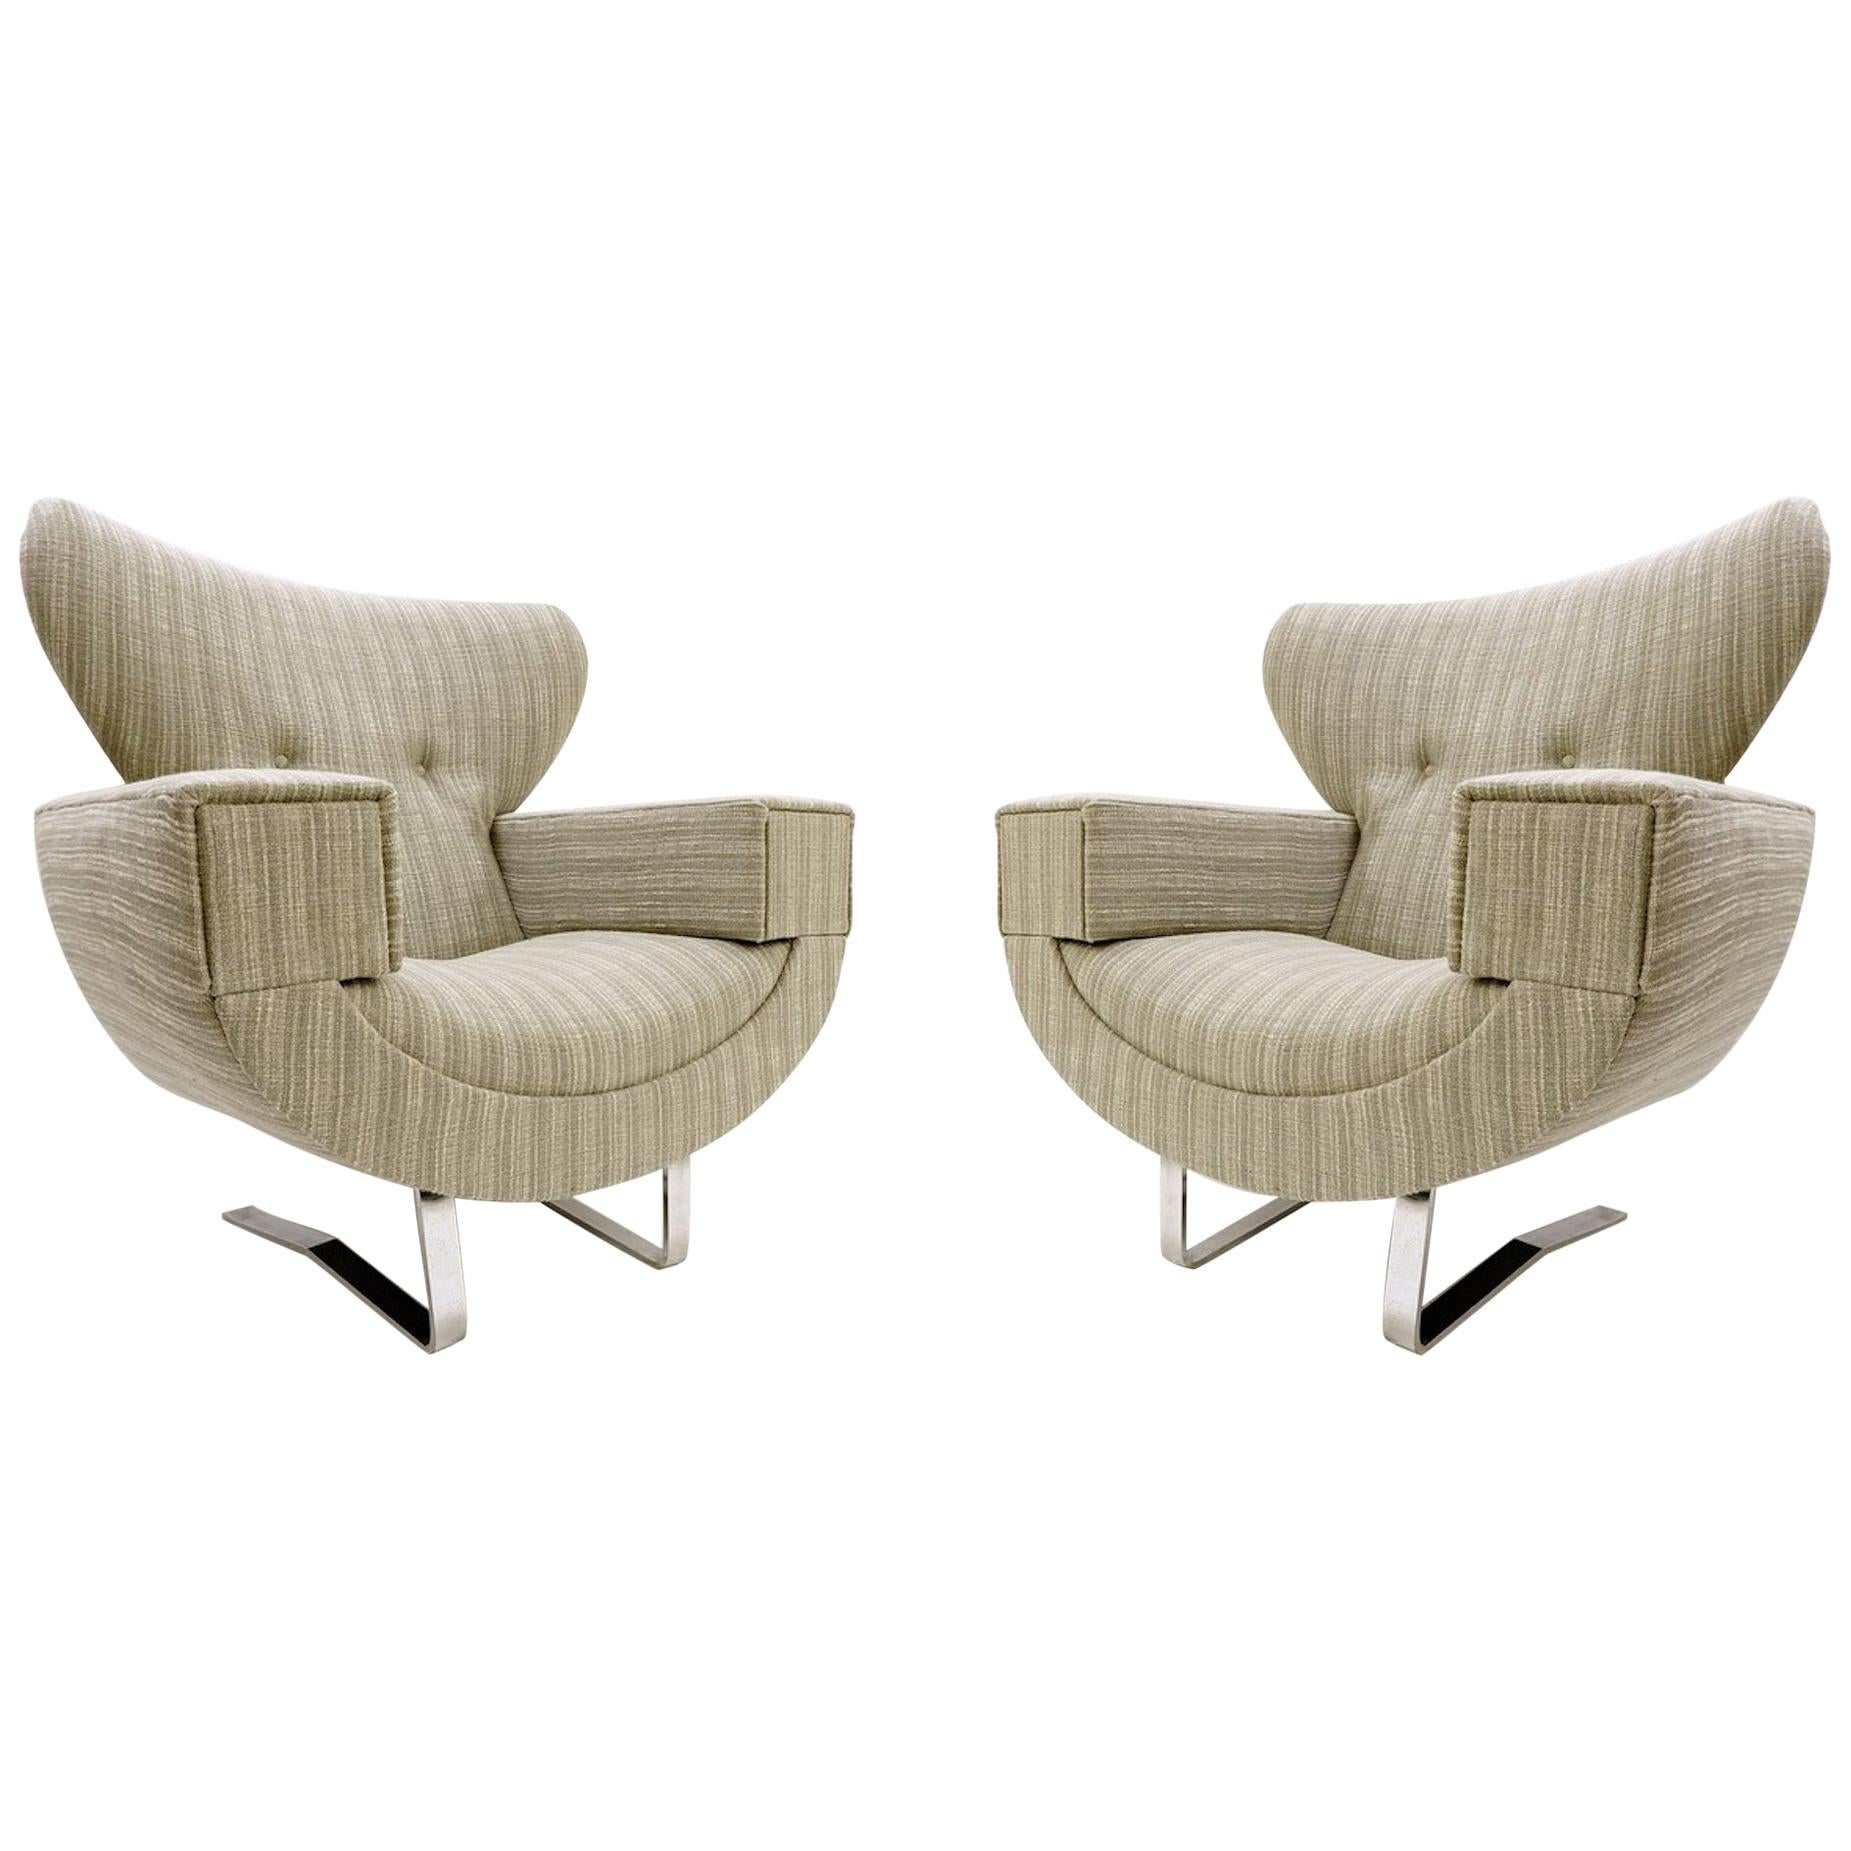 Pair of Large Armchairs with Chrome Legs, 1970s